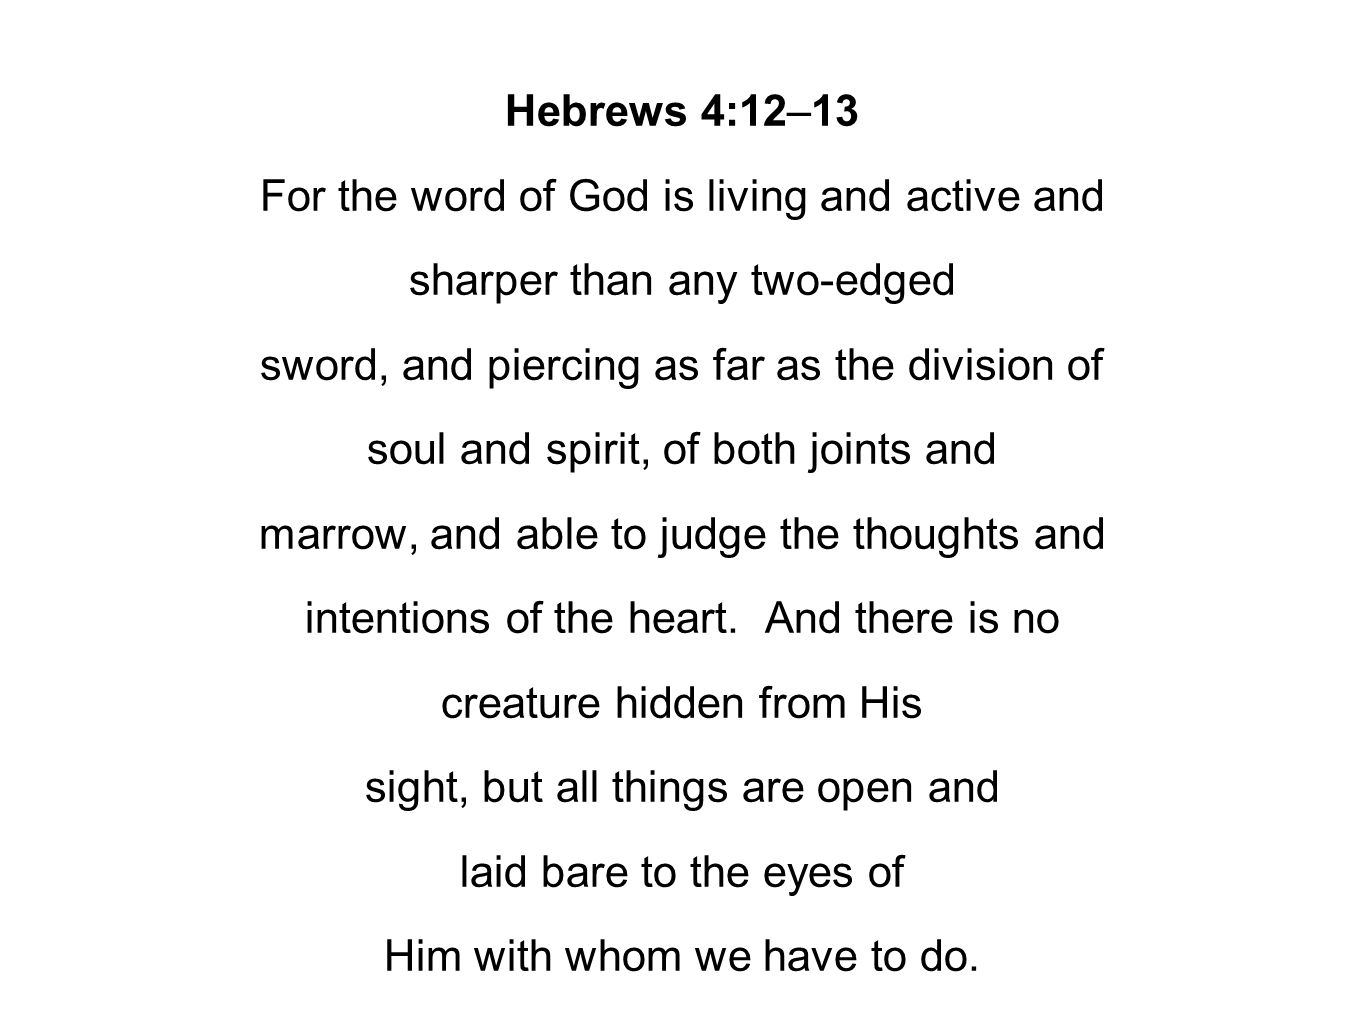 Hebrews 4:12–13 For the word of God is living and active and sharper than any two-edged sword, and piercing as far as the division of soul and spirit, of both joints and marrow, and able to judge the thoughts and intentions of the heart.